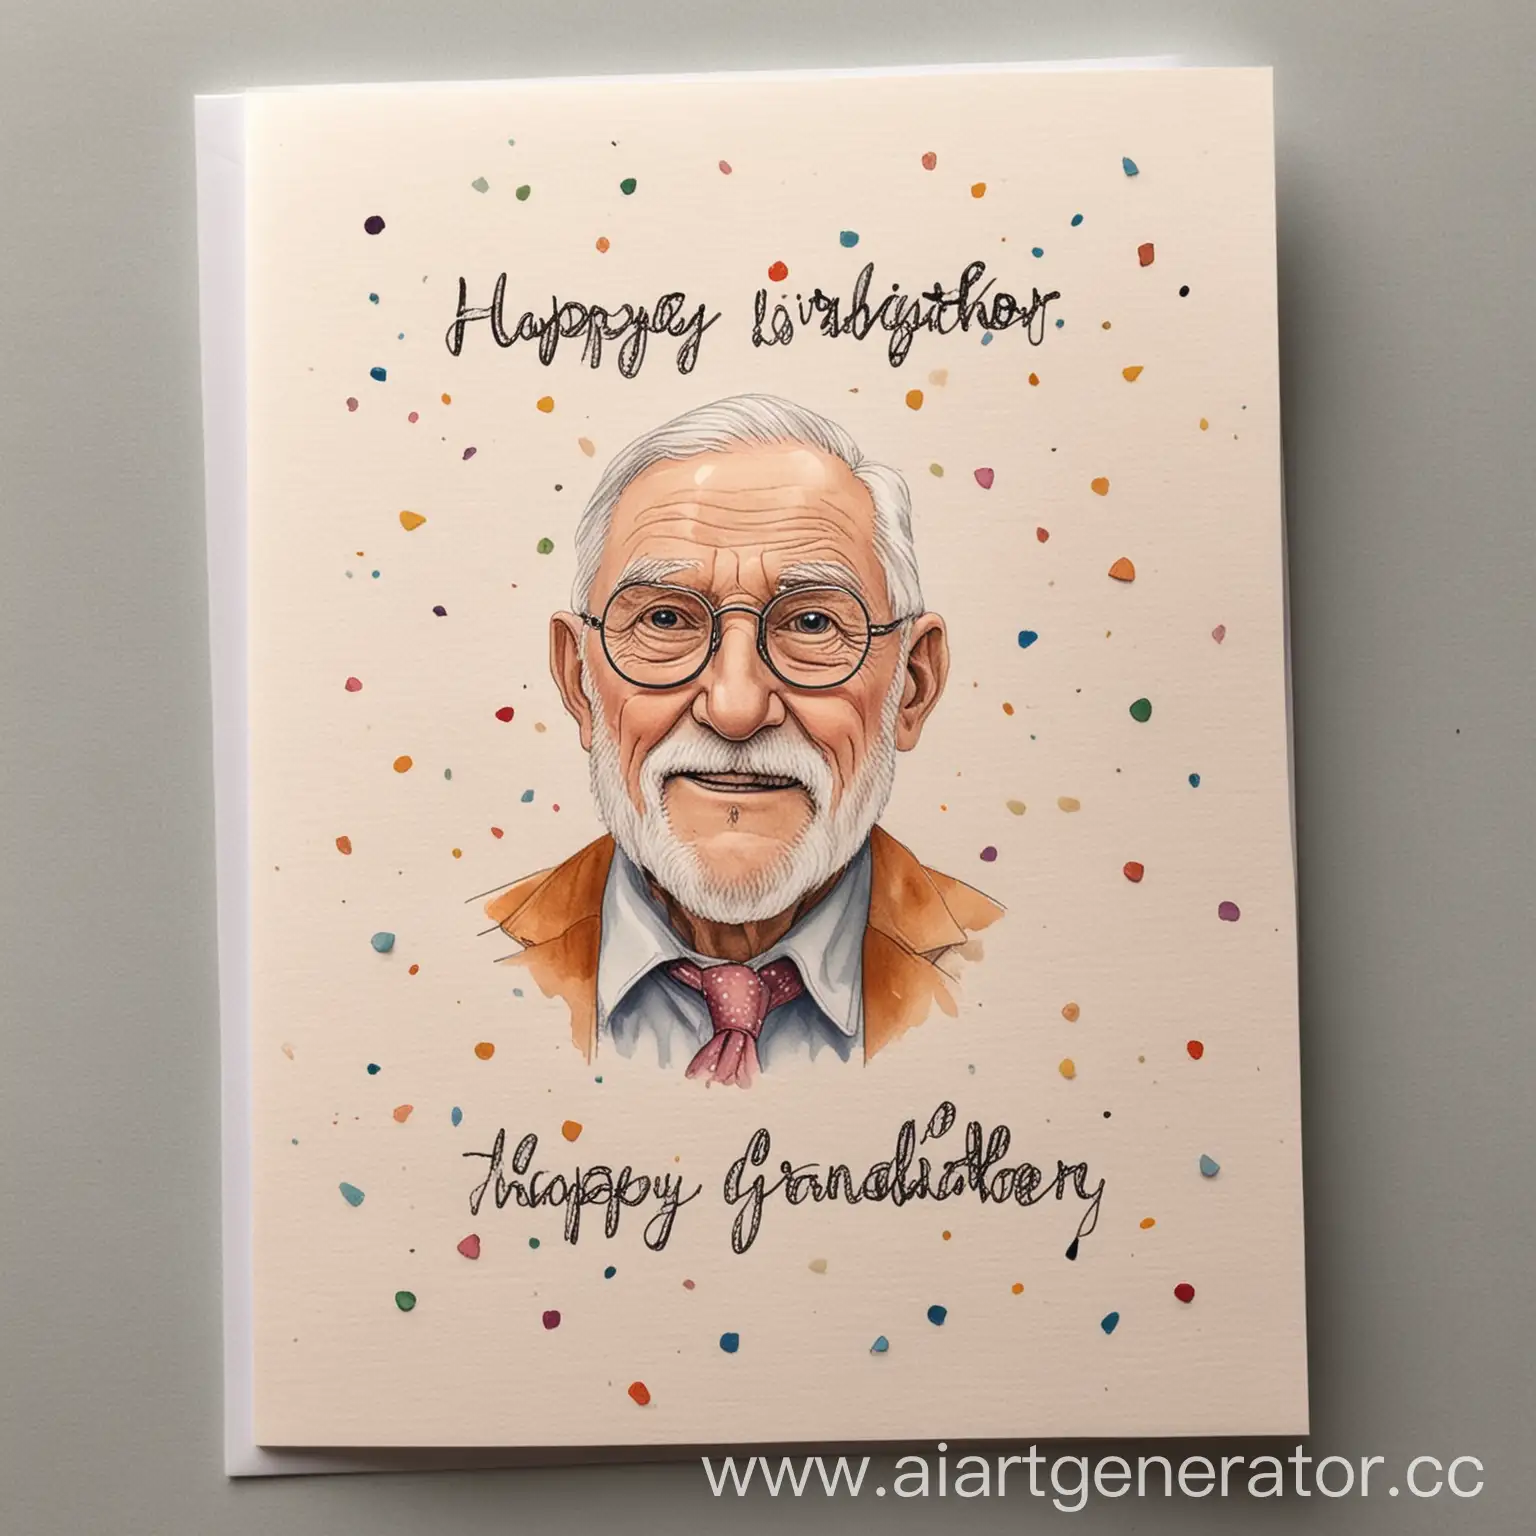 Colorful-Birthday-Card-Design-for-Grandfather-Celebrating-Creativity-and-Love